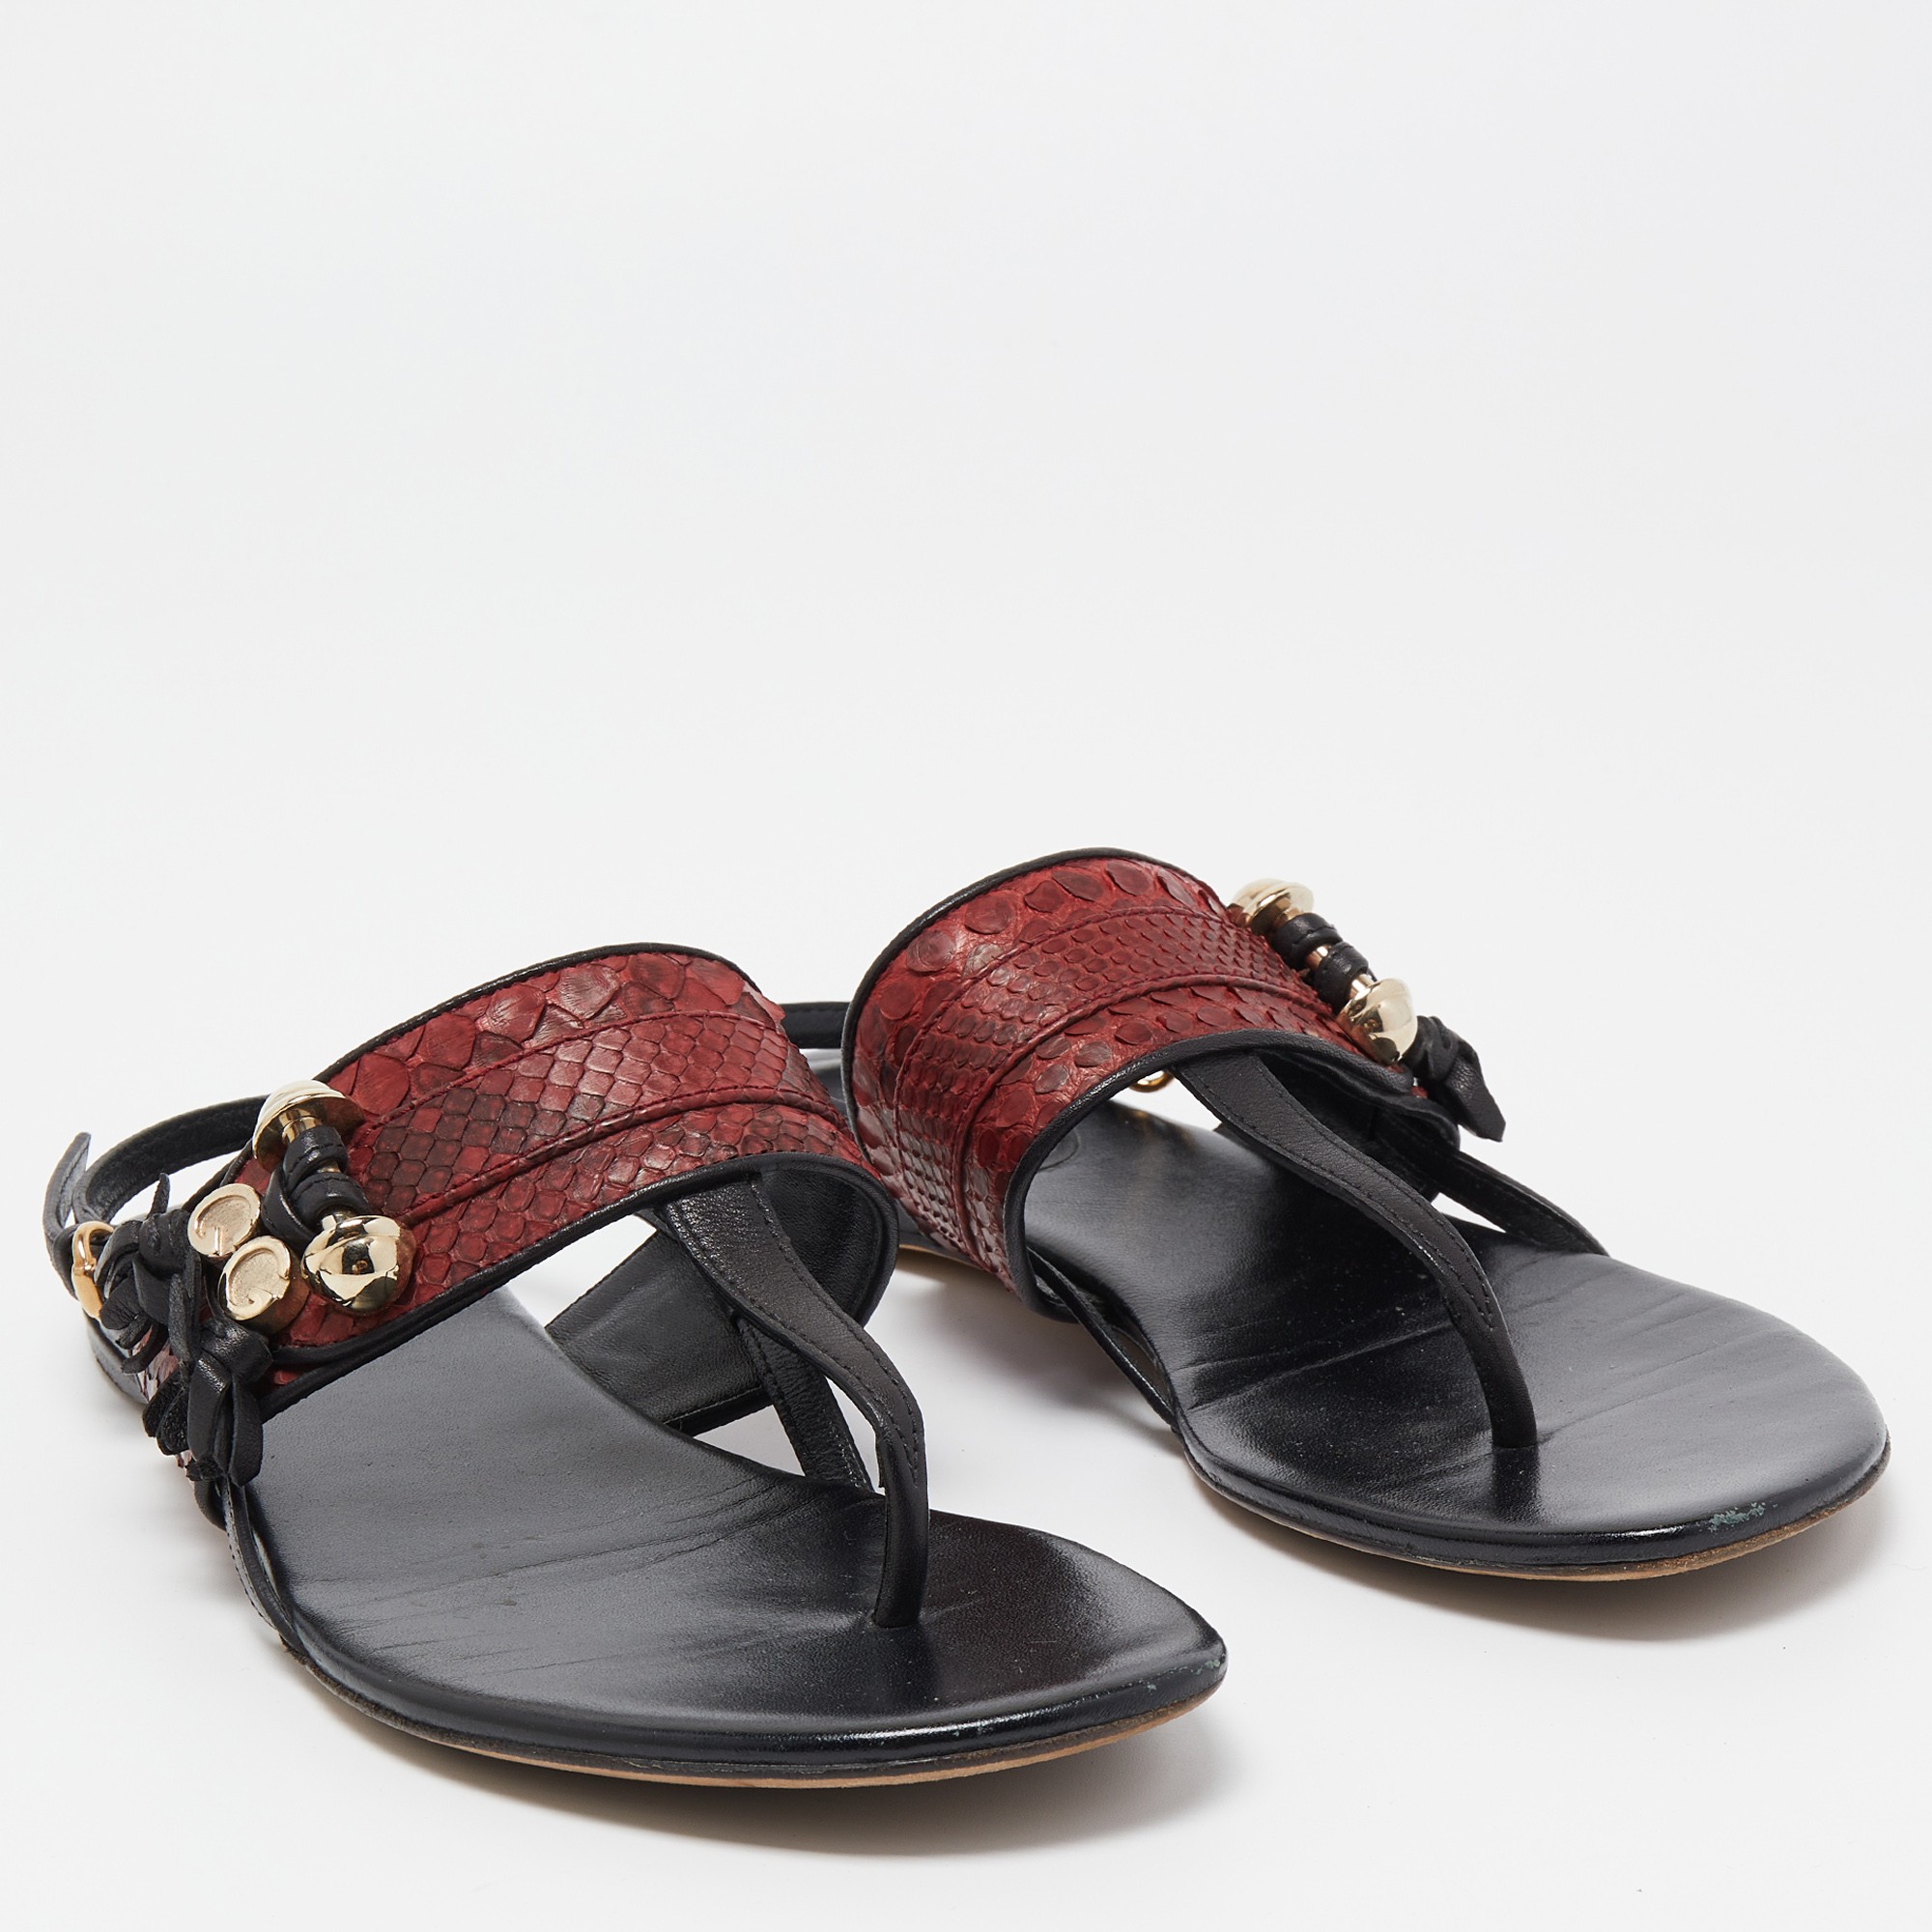 Gucci Red/Black Python And Leather Thong Flat Sandals Size 37